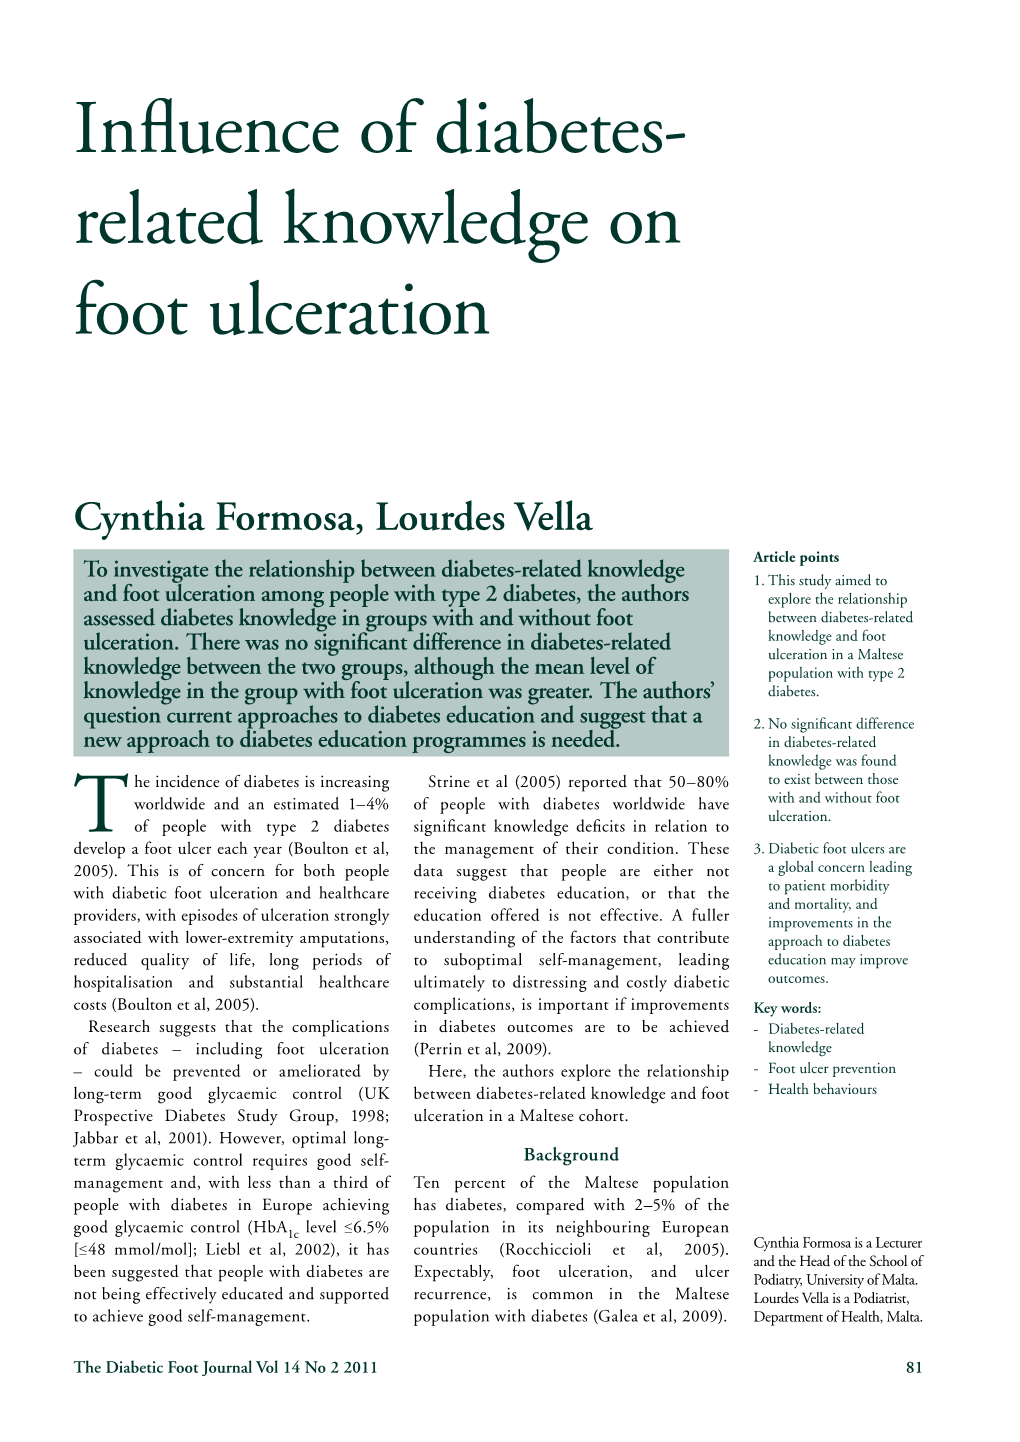 Influence of Diabetes- Related Knowledge on Foot Ulceration